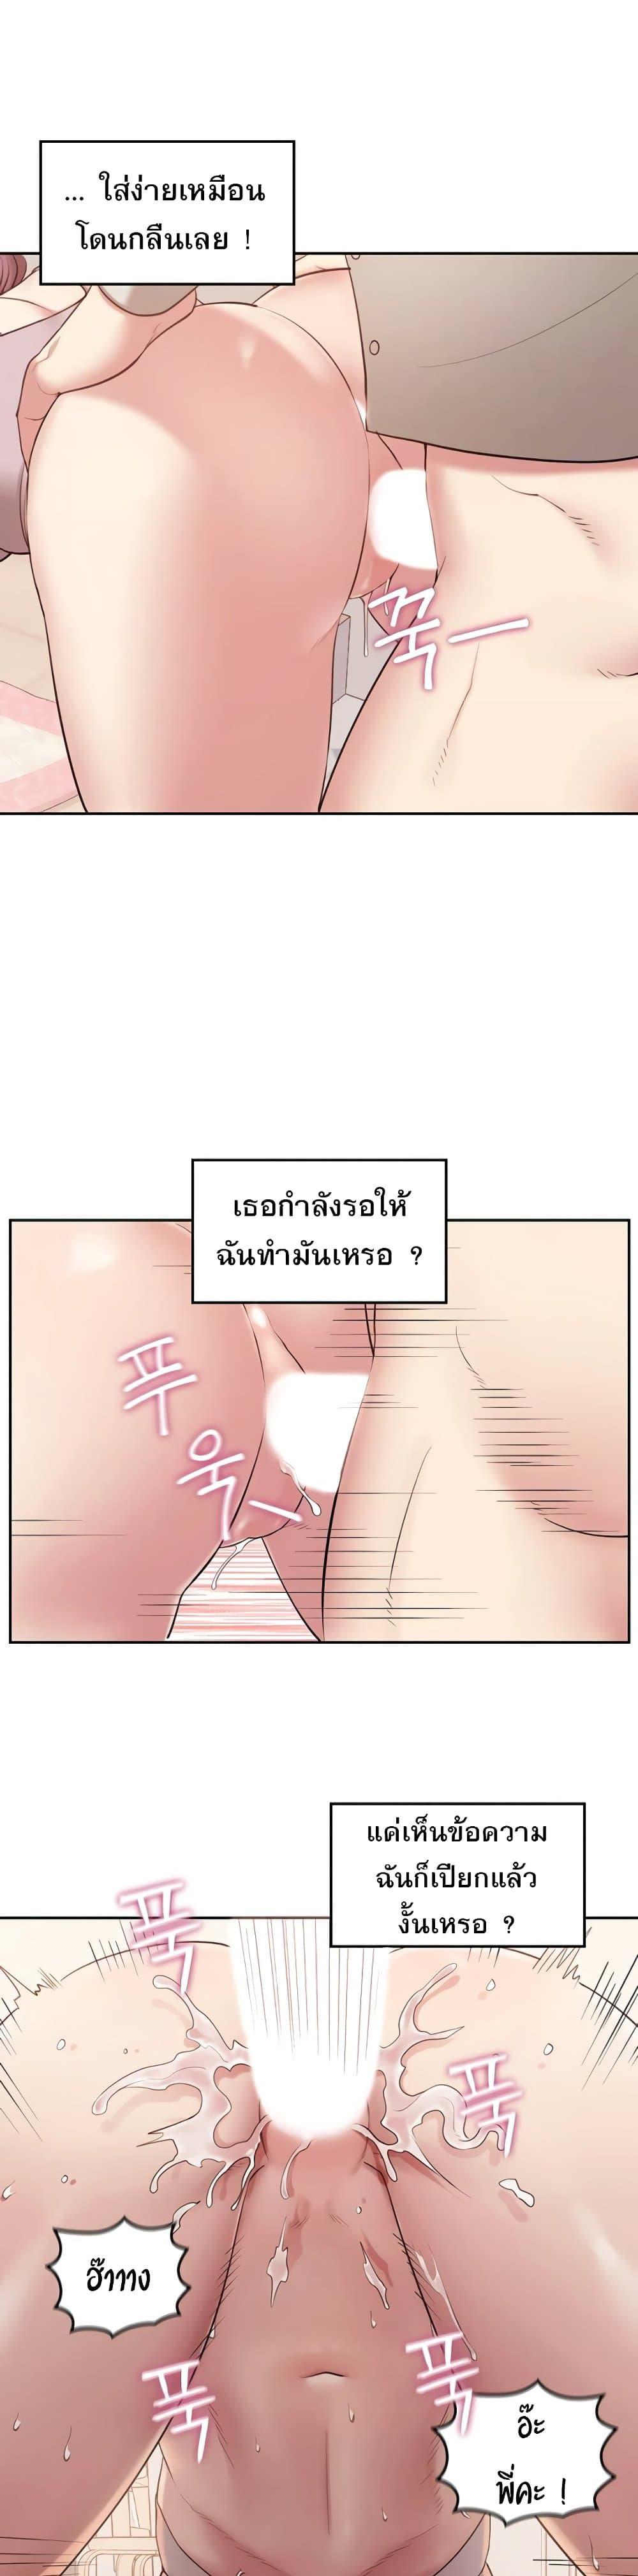 Sexual Consulting 2 ภาพ 29